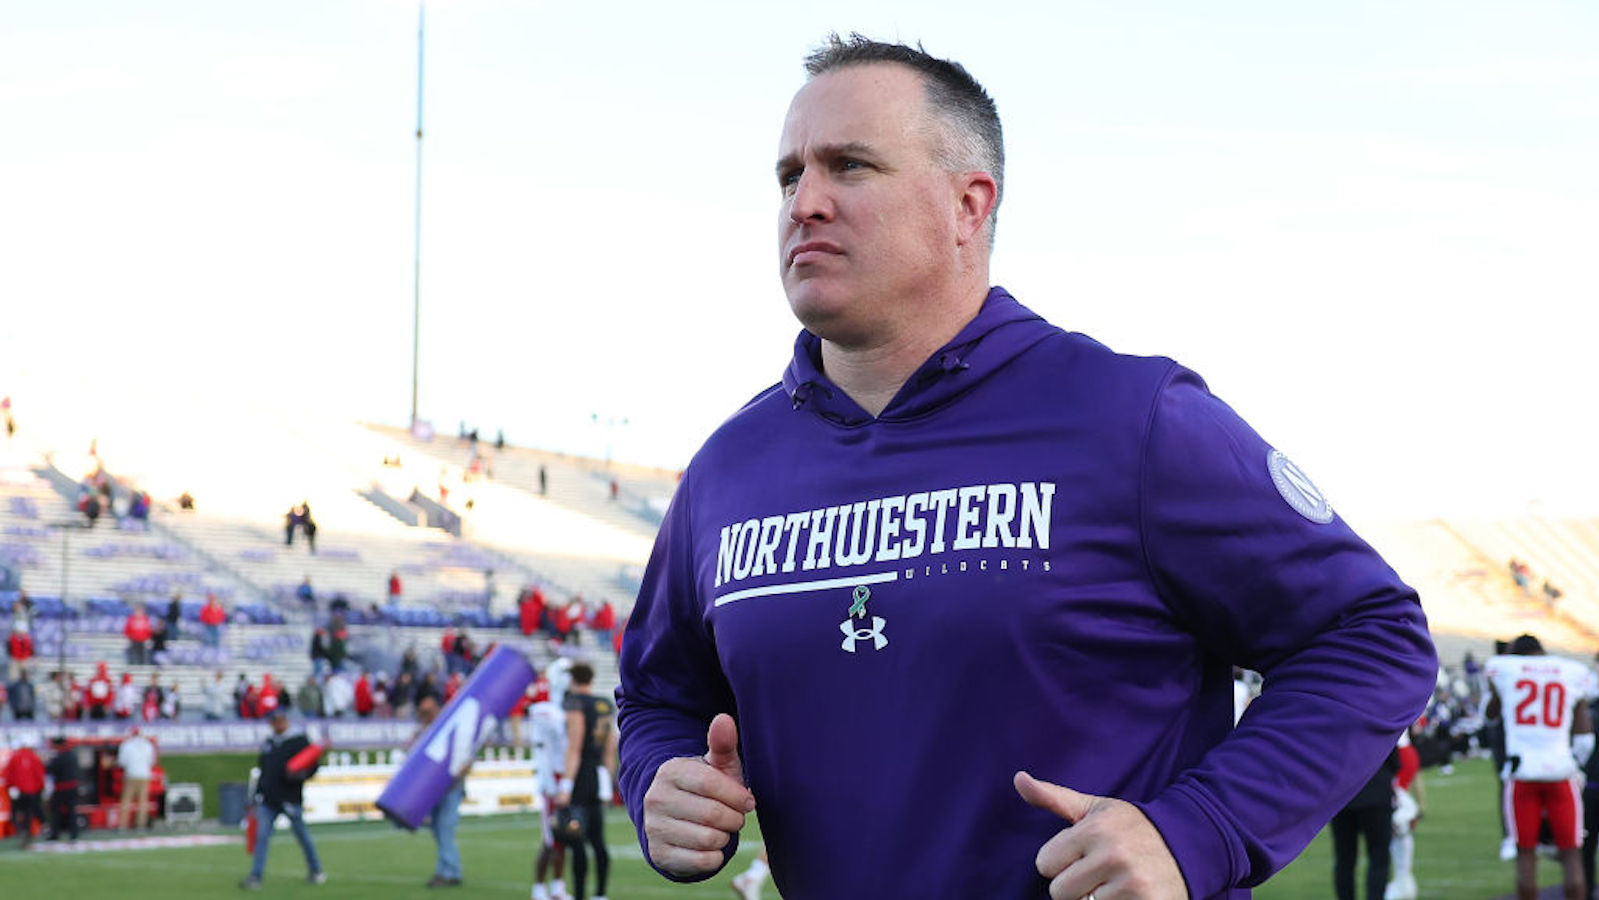 Head coach Pat Fitzgerald of the Northwestern Wildcats runs off the field after losing to the Wisconsin Badgers at Ryan Field on October 08, 2022 in Evanston, Illinois.